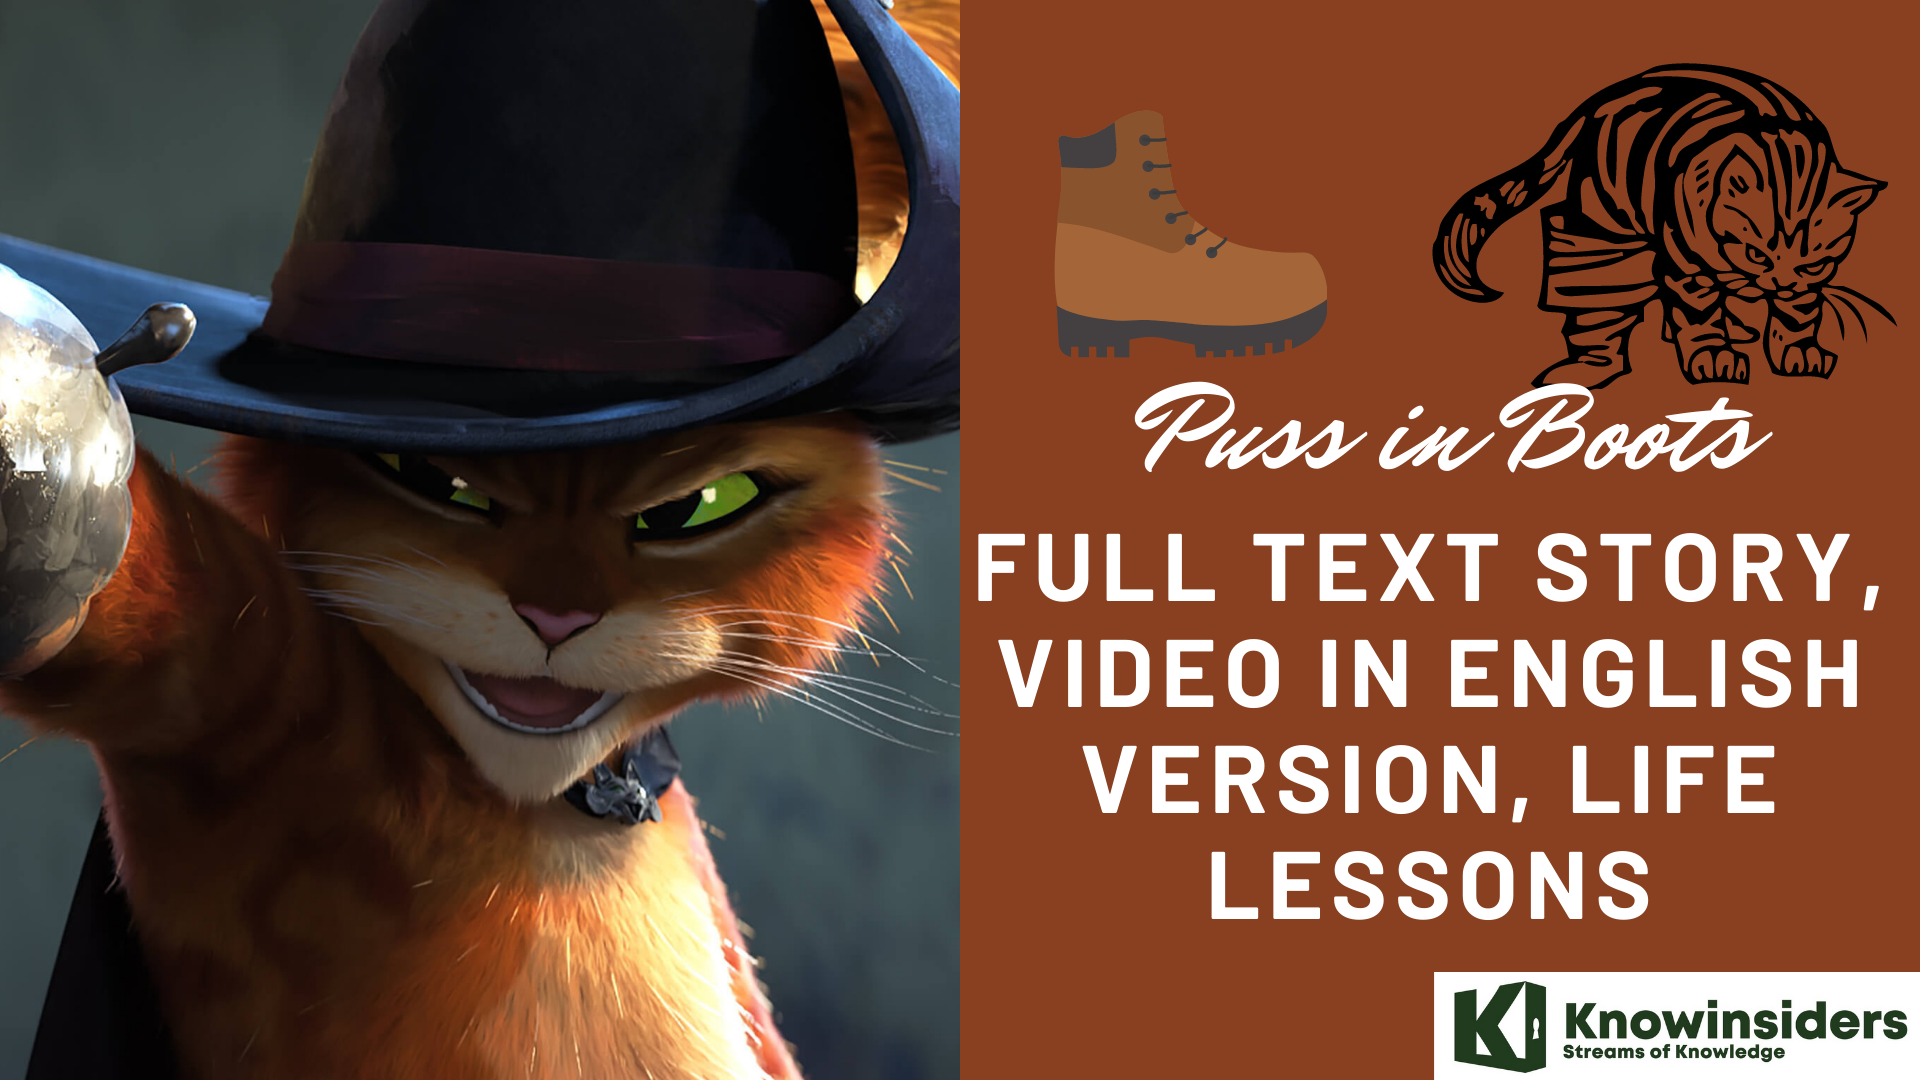 Puss in Boots: Full Text Story, Video in English Version, Life Lessons